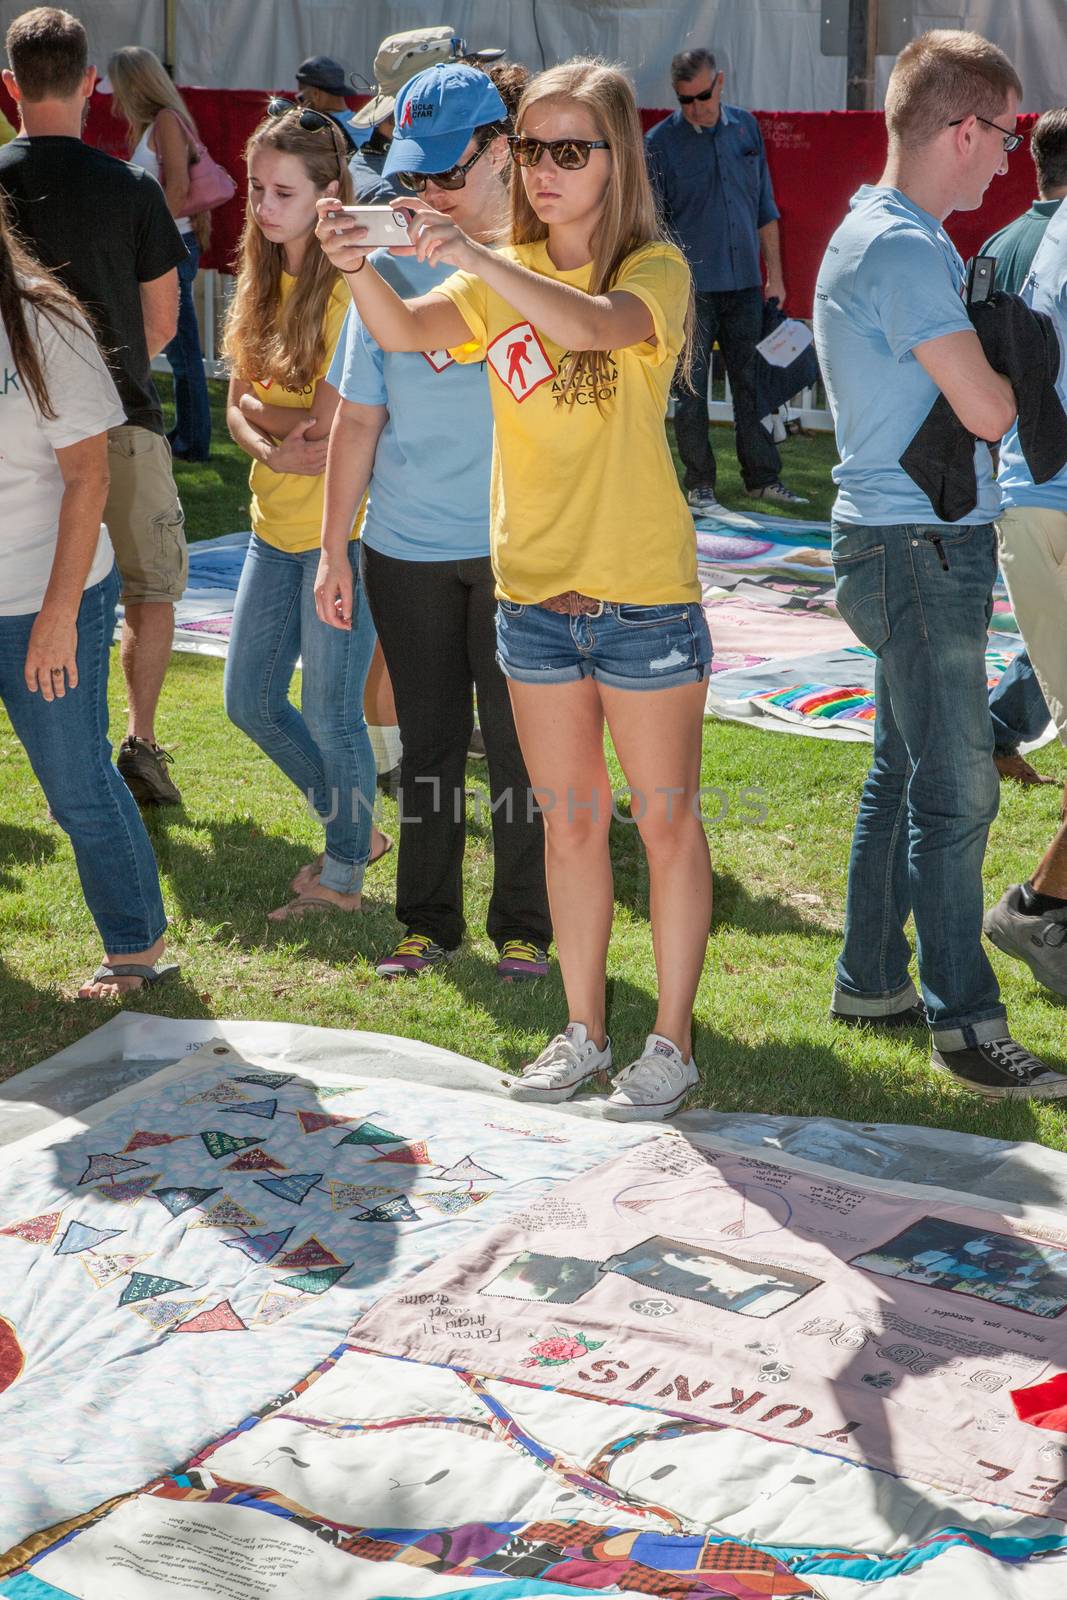 TUCSON, AZ/USA - OCTOBER 12:  Unidentifed young woman photogrph section of AIDS quilt son October 12, 2014 in Tucson, Arizona, USA.